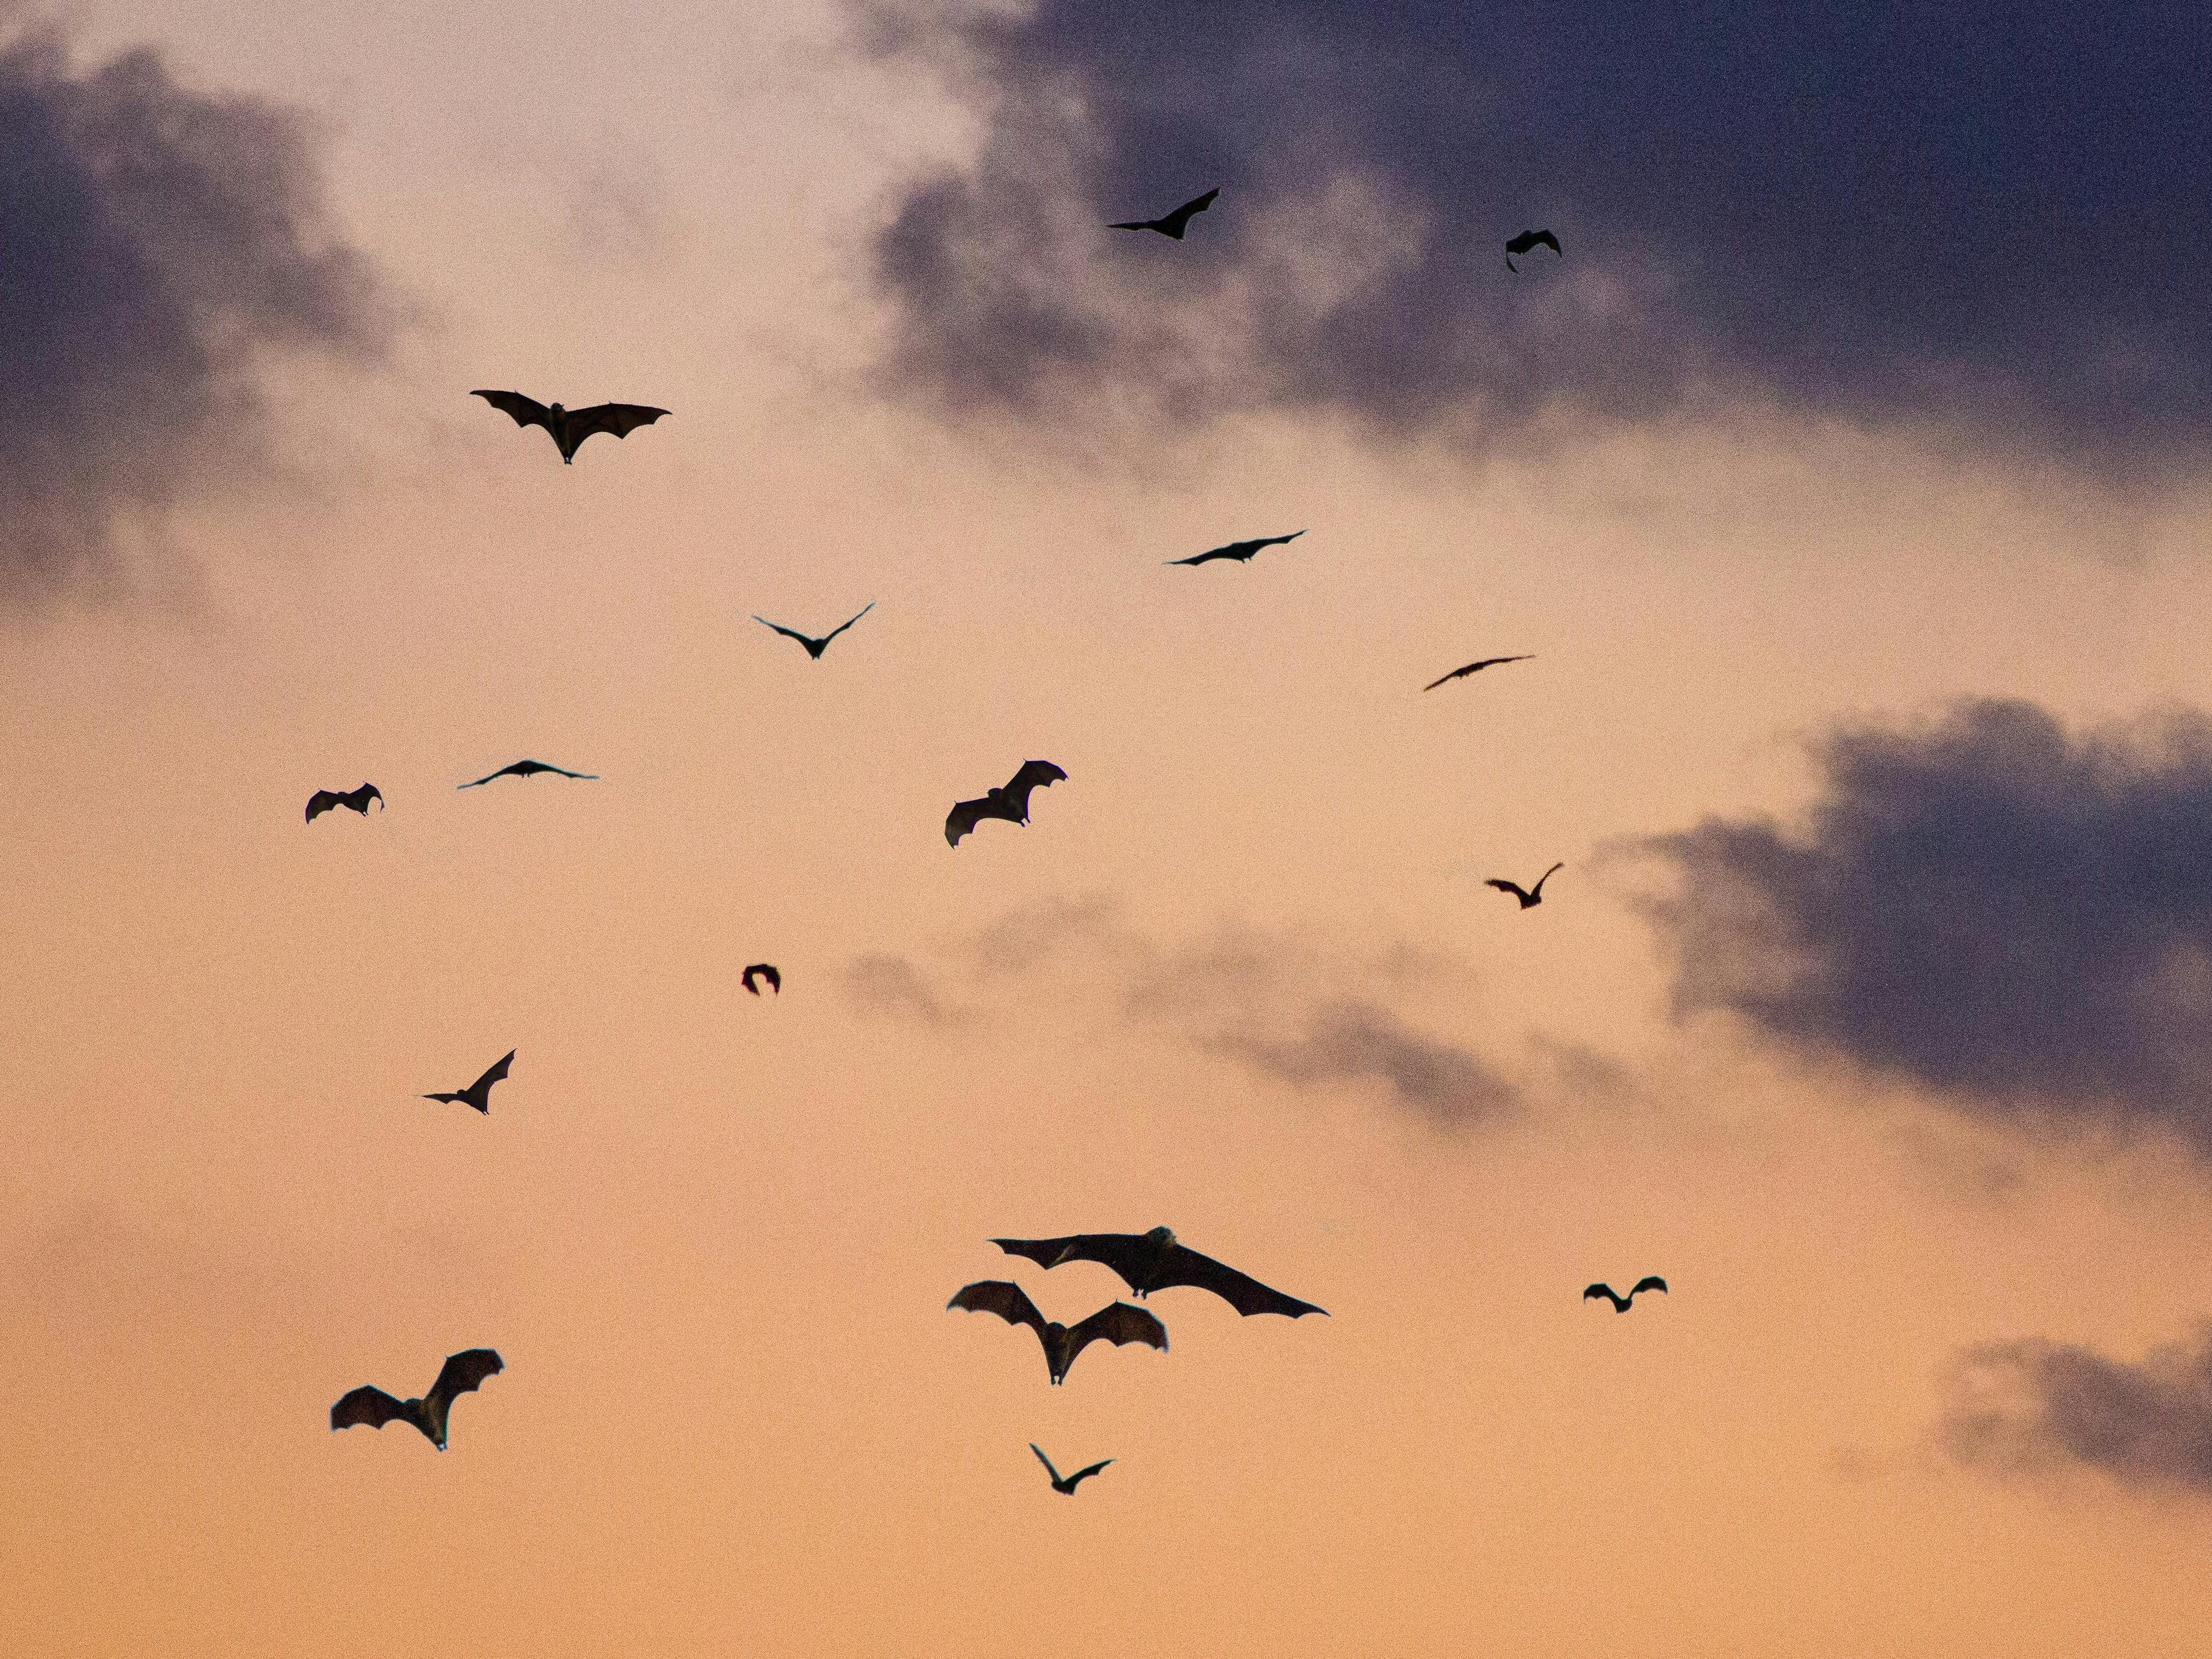 Photograph of a group of bats in the sky at dusk